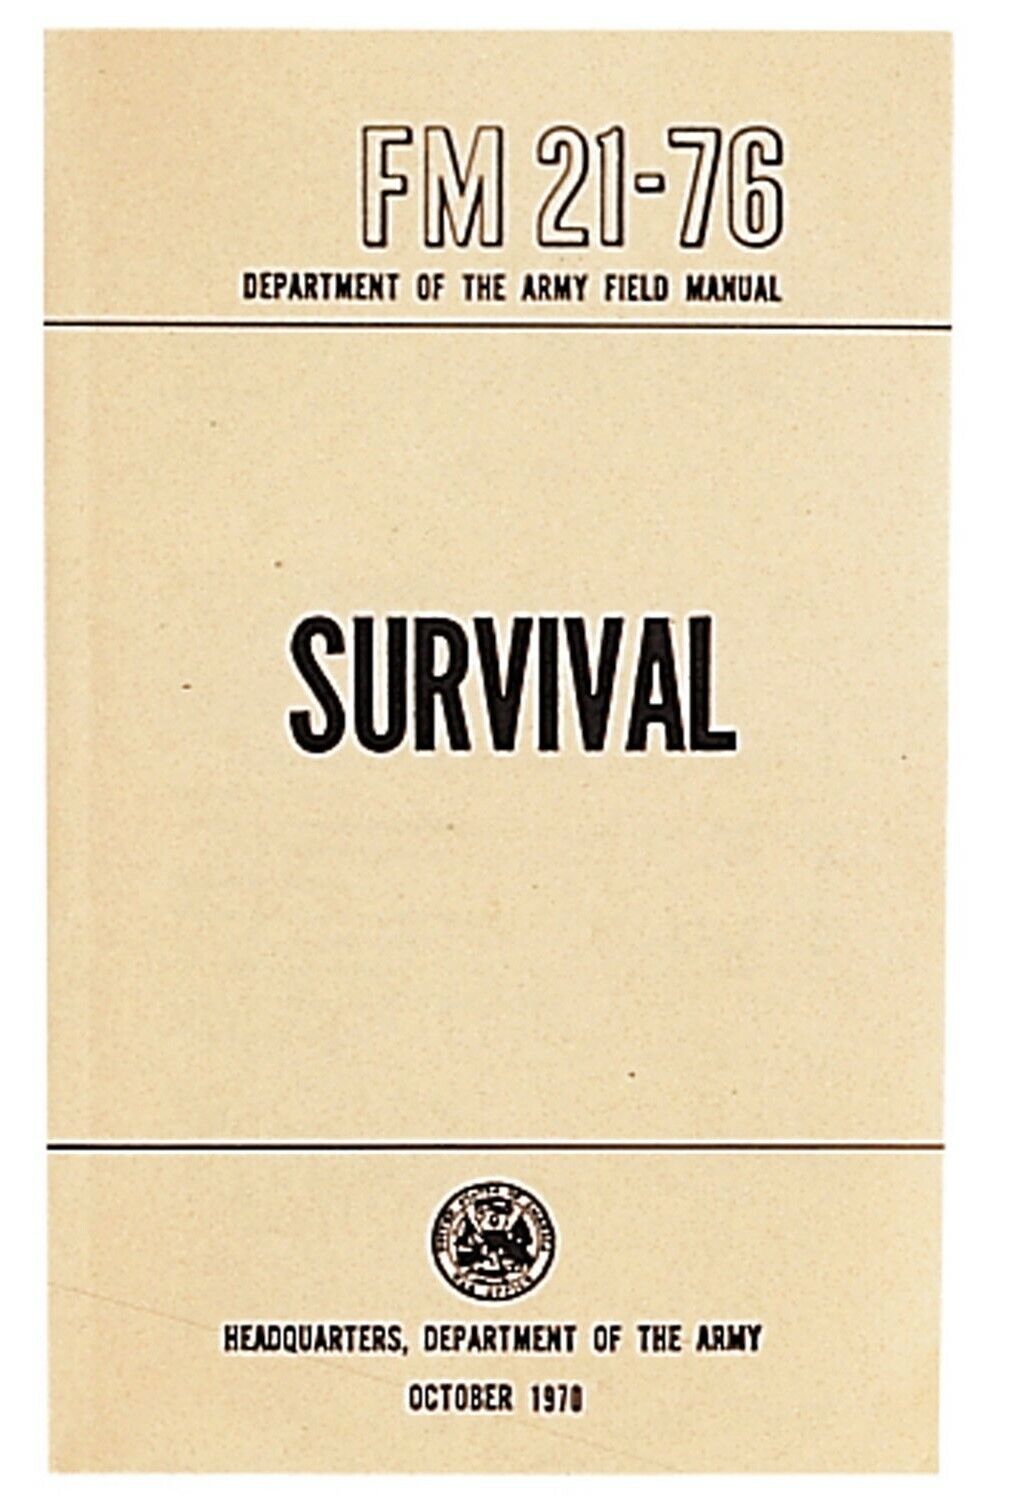 FM21-76 SURVIVAL US Army Field Manual 1970 Training Department of Army 288 pages